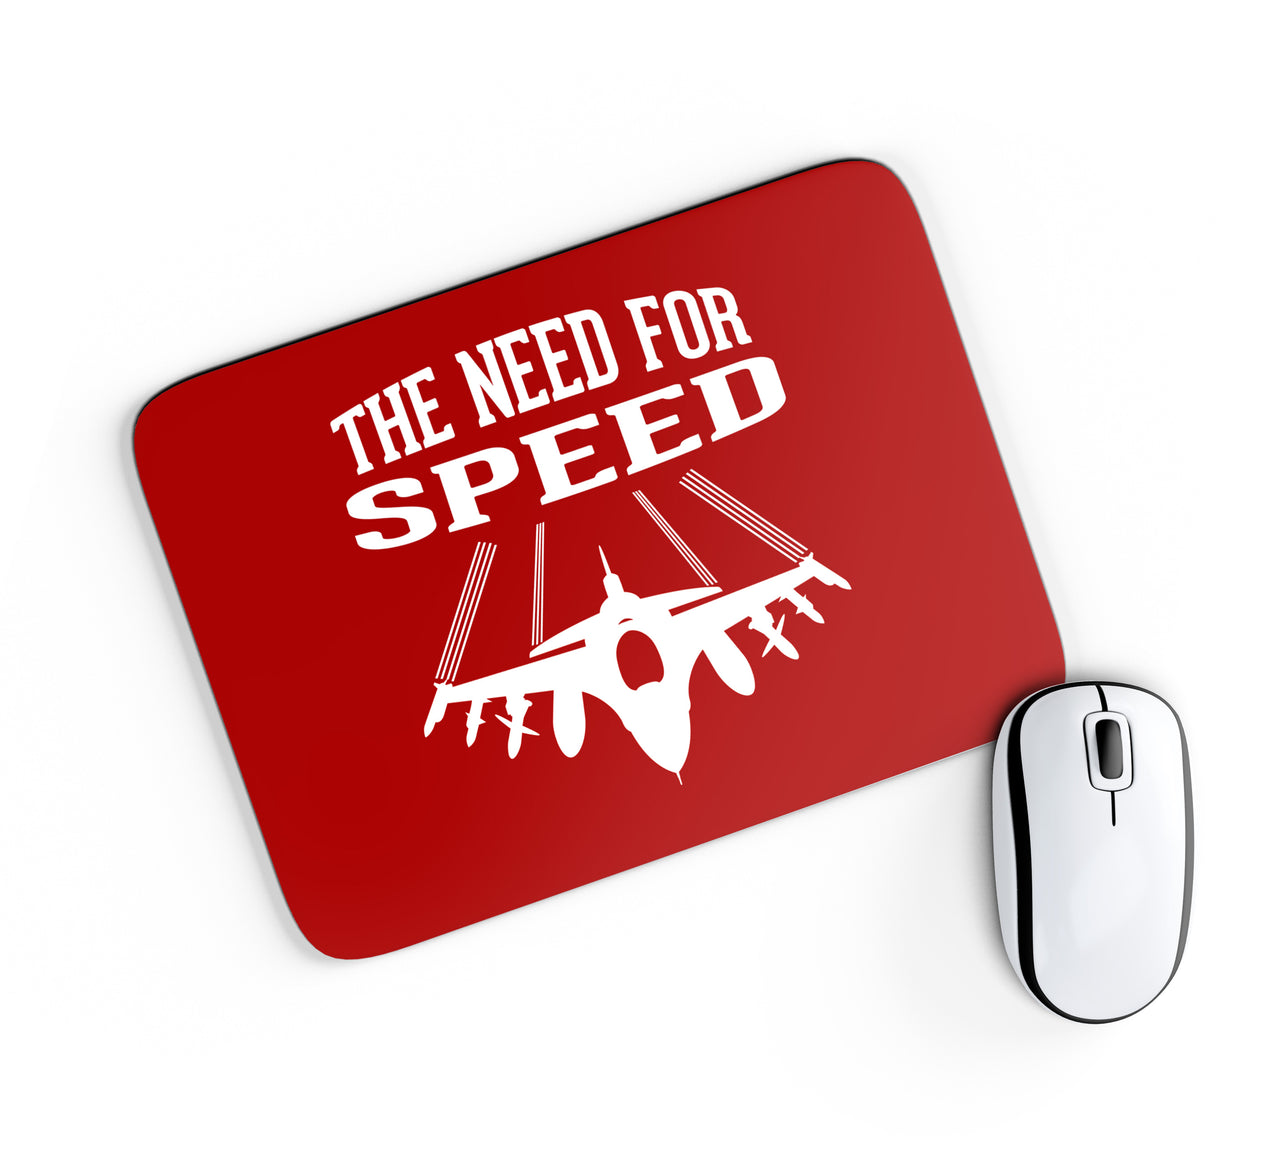 The Need For Speed Designed Mouse Pads